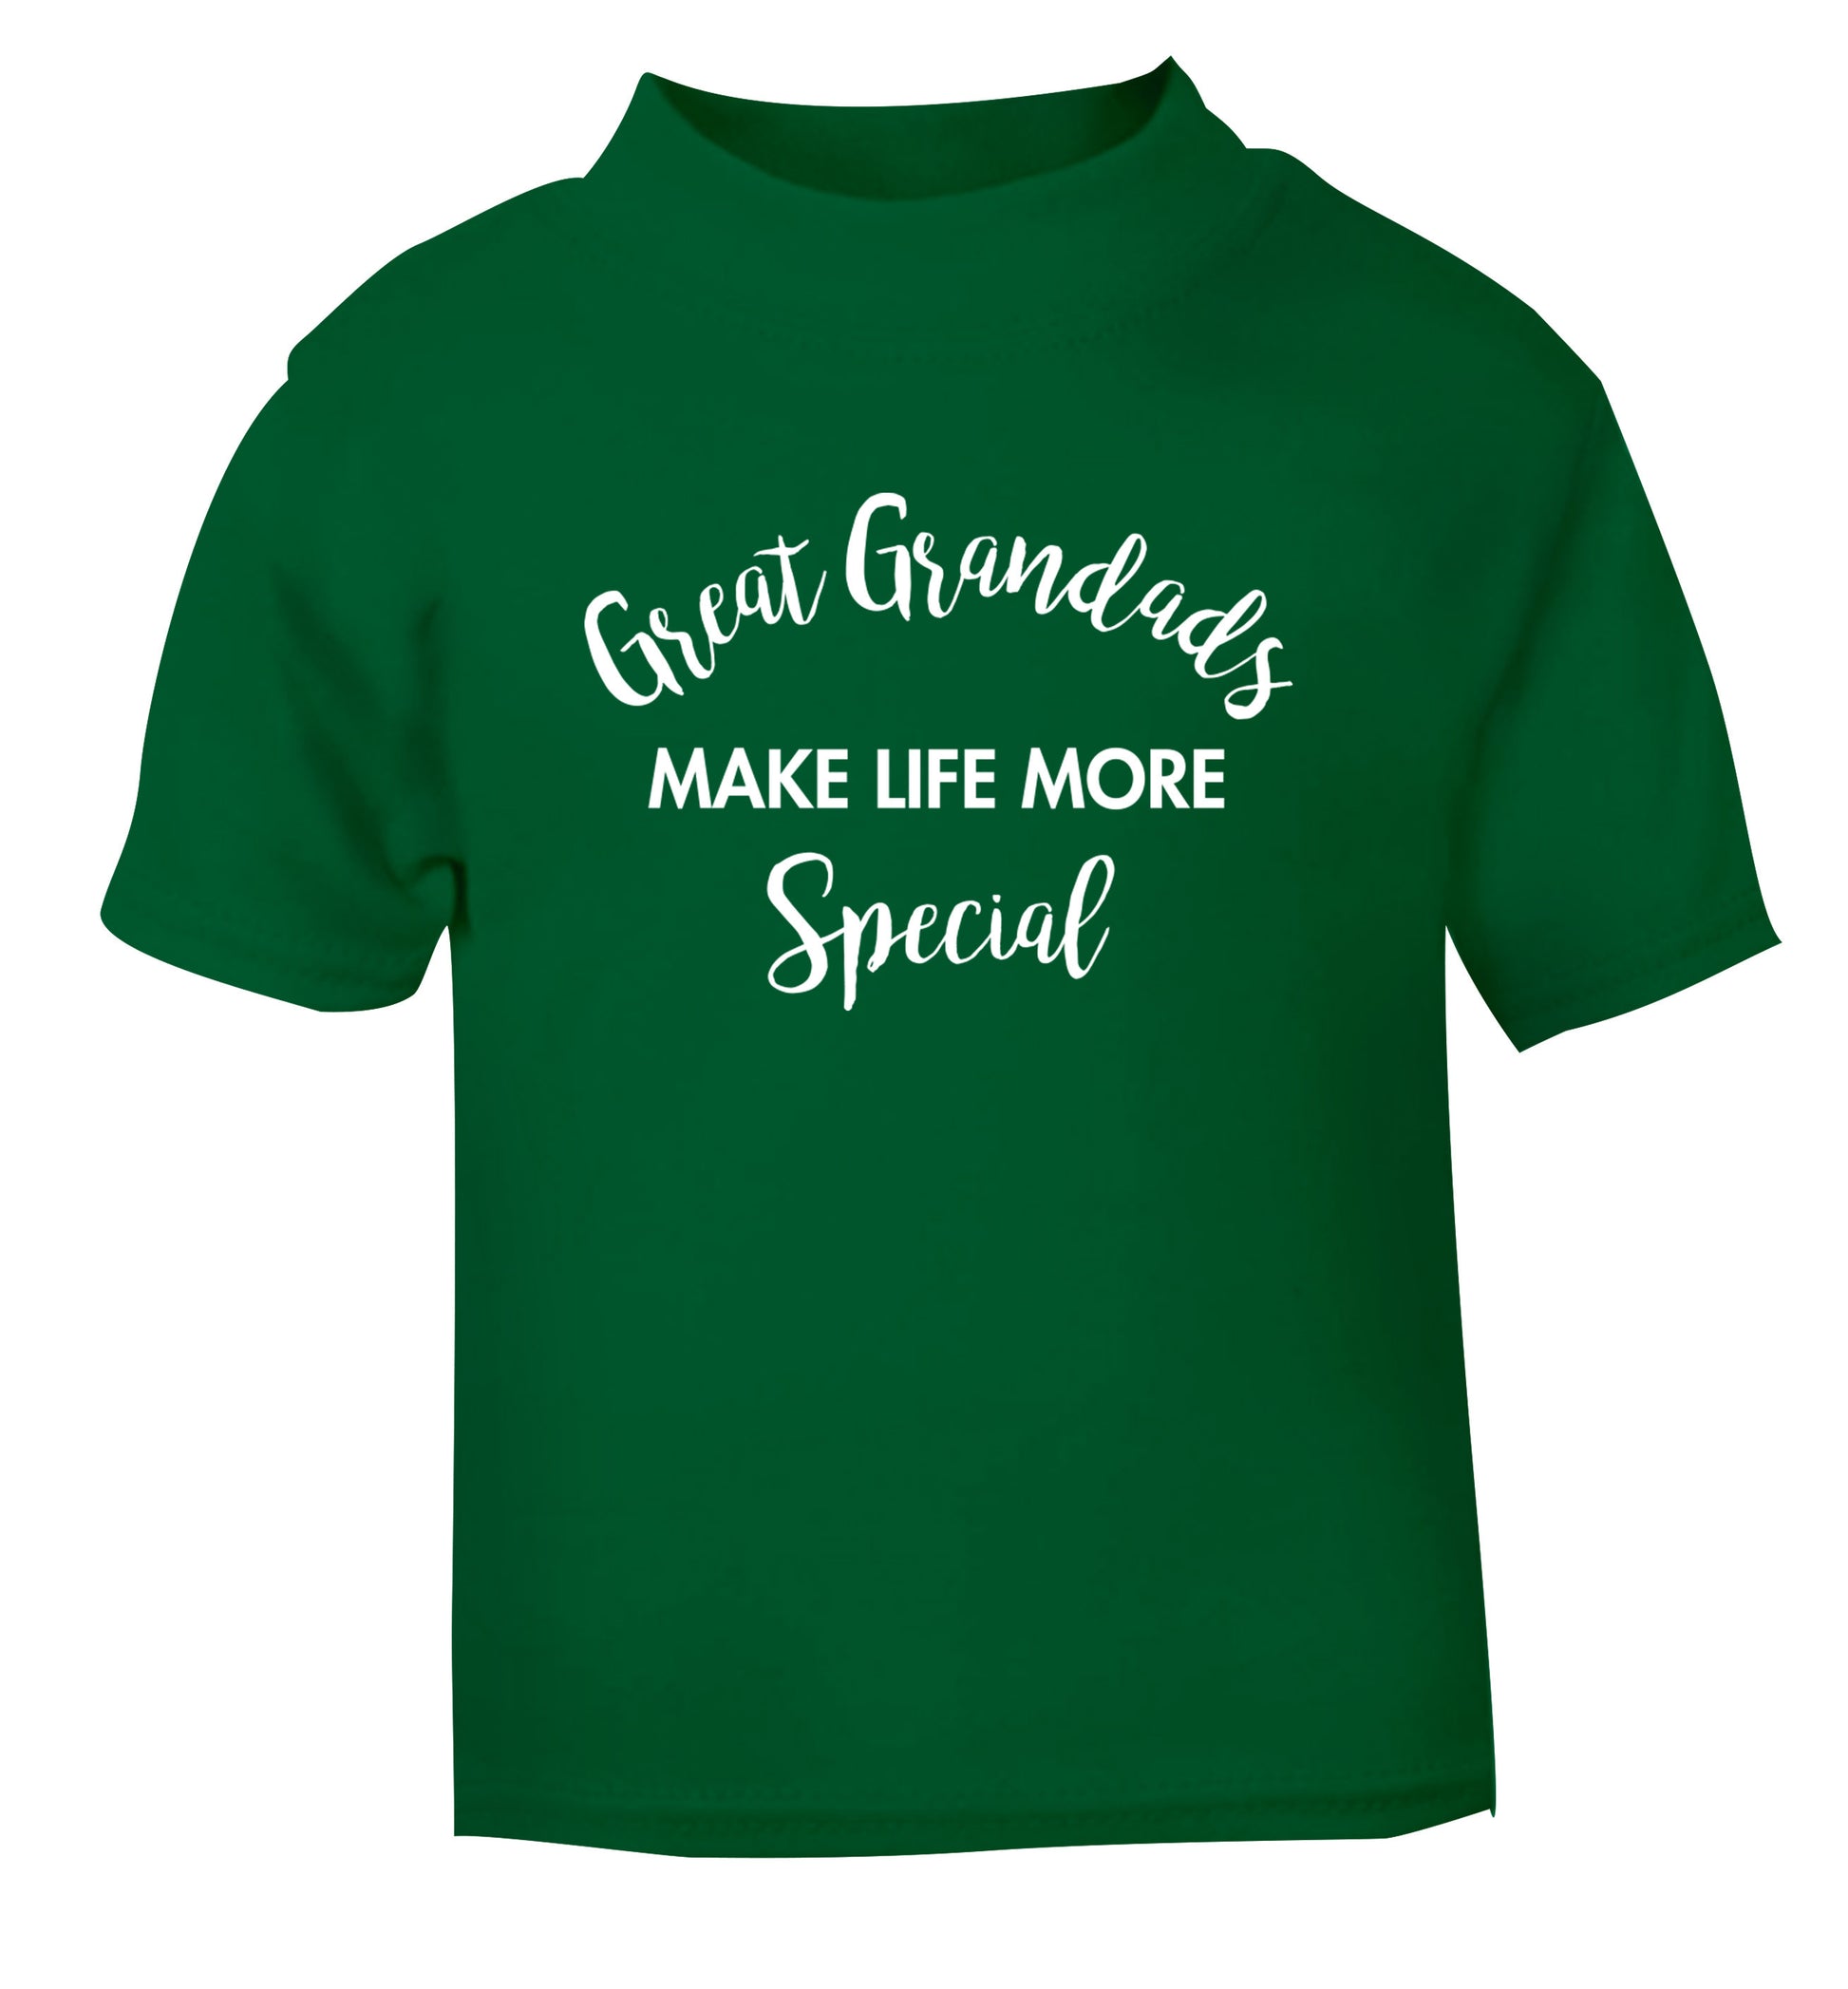 Great Grandads make life more special green Baby Toddler Tshirt 2 Years